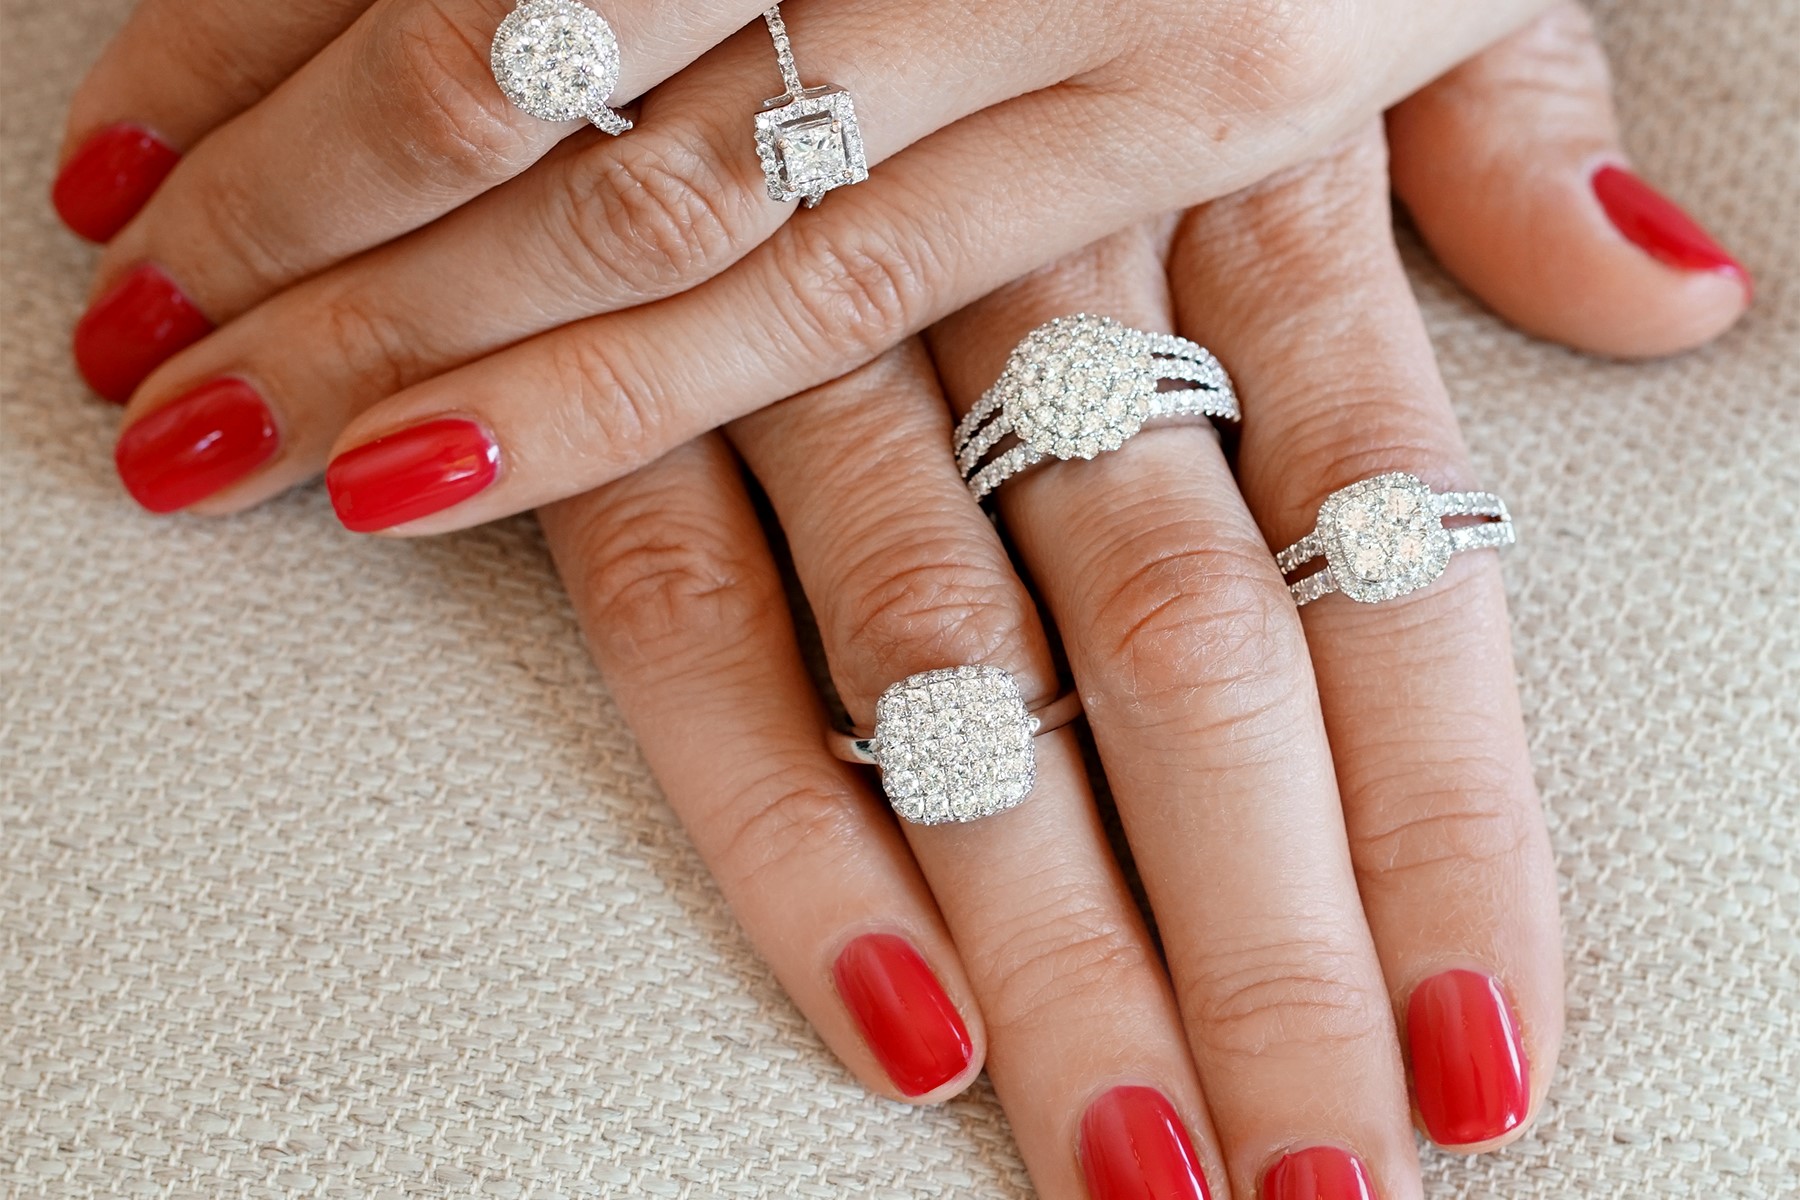 10 Best Engagement Rings and Wedding Rings in 2022